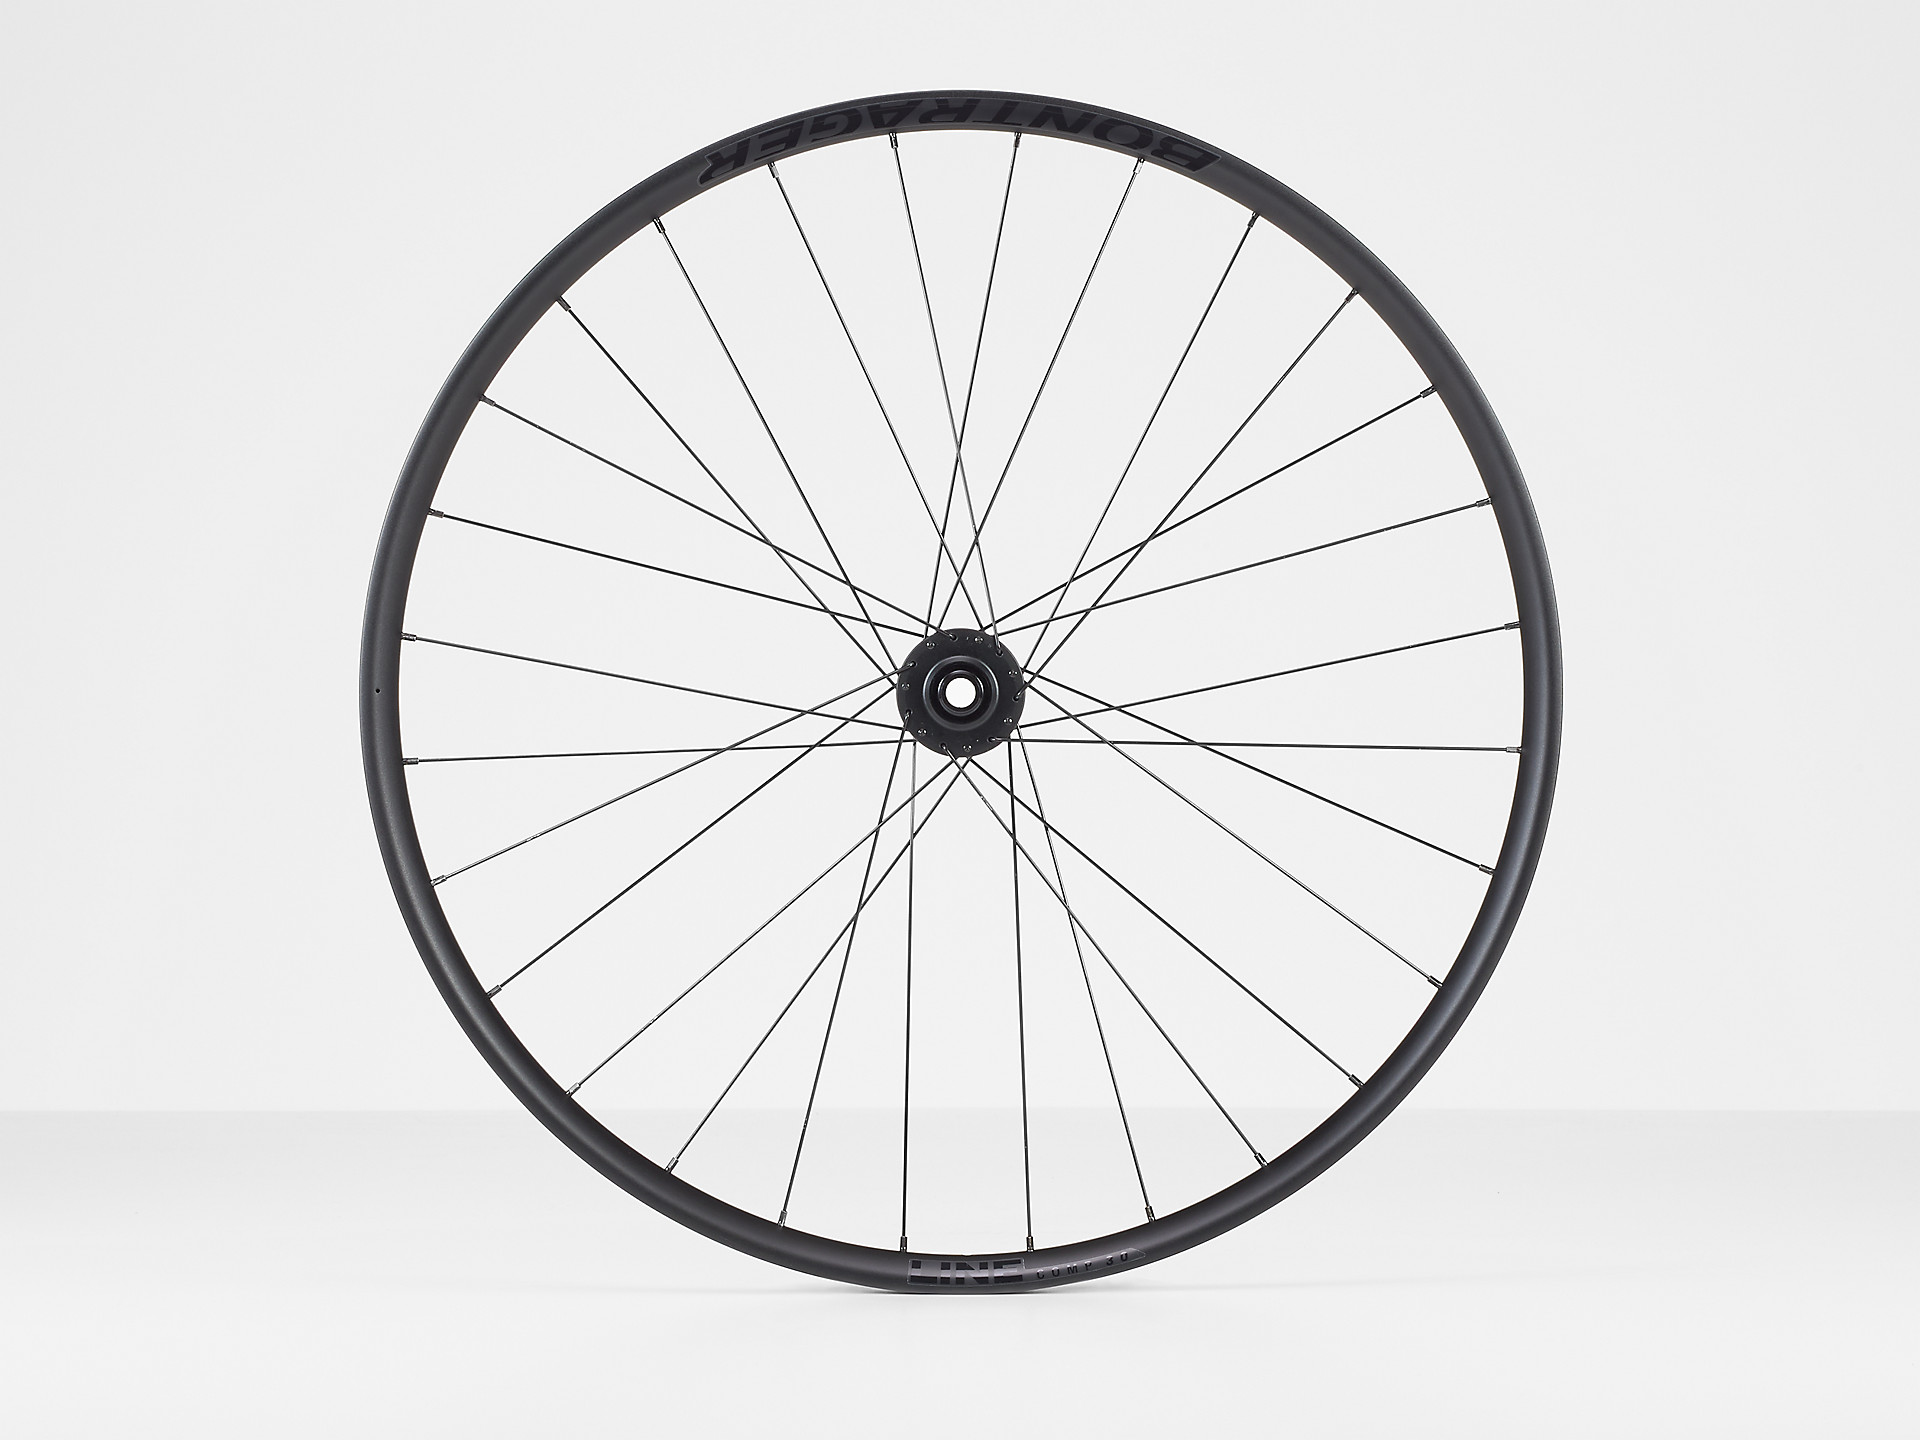 <a href="https://cycles-clement.be/product/roue-av-bont-line-comp-30-29d-110-black/">ROUE AV BONT LINE COMP 30 29D 110 BLACK</a>